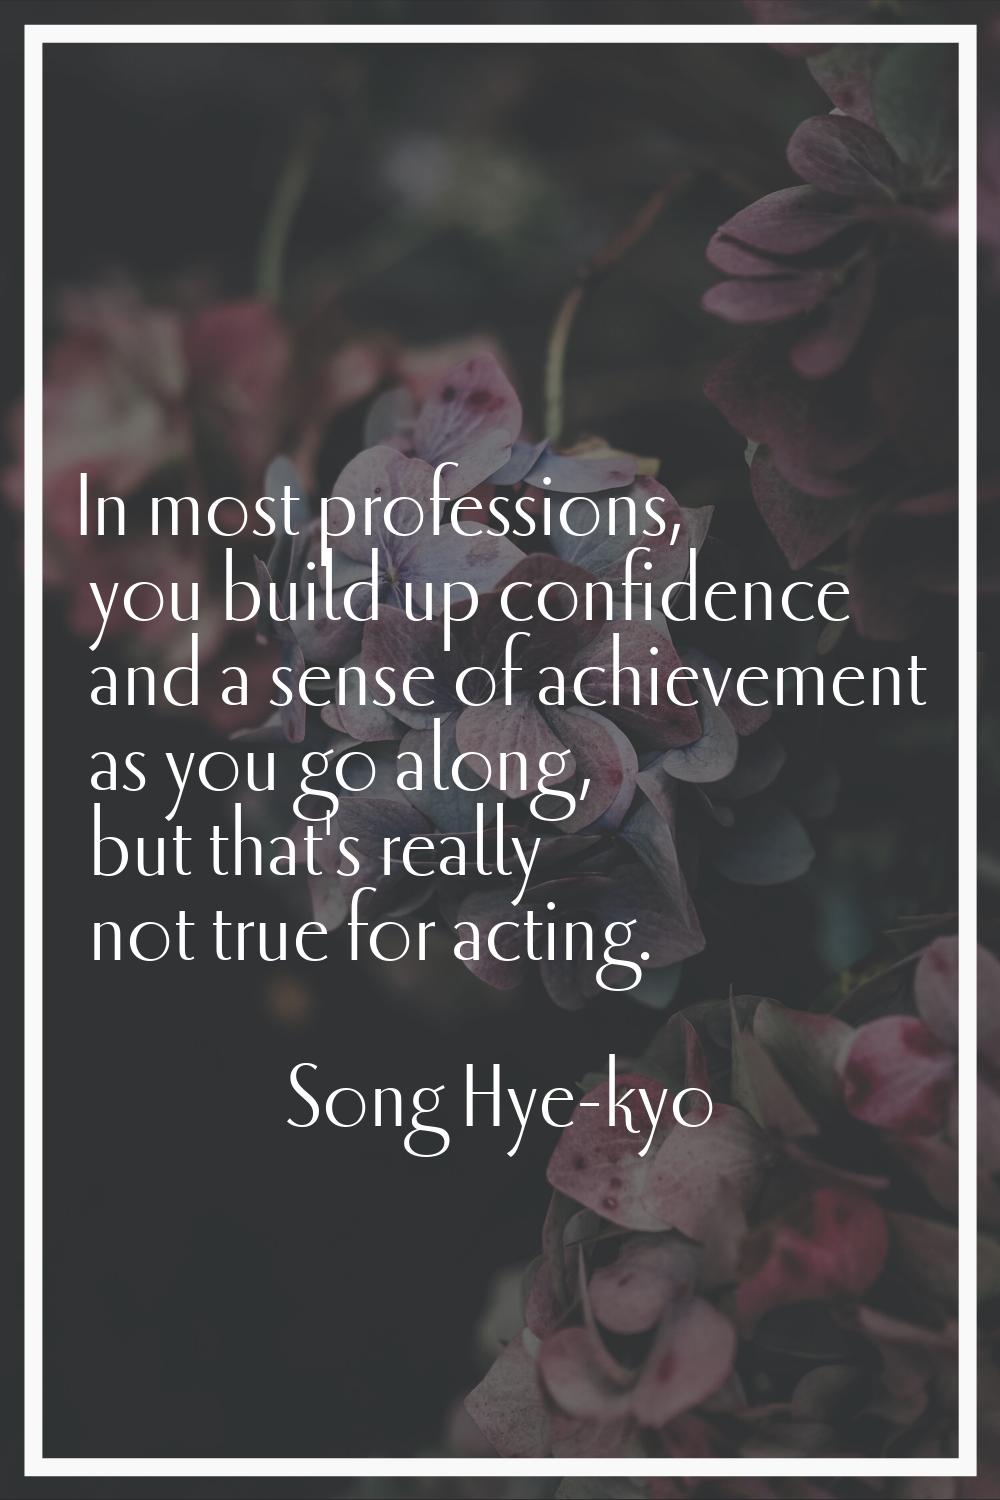 In most professions, you build up confidence and a sense of achievement as you go along, but that's